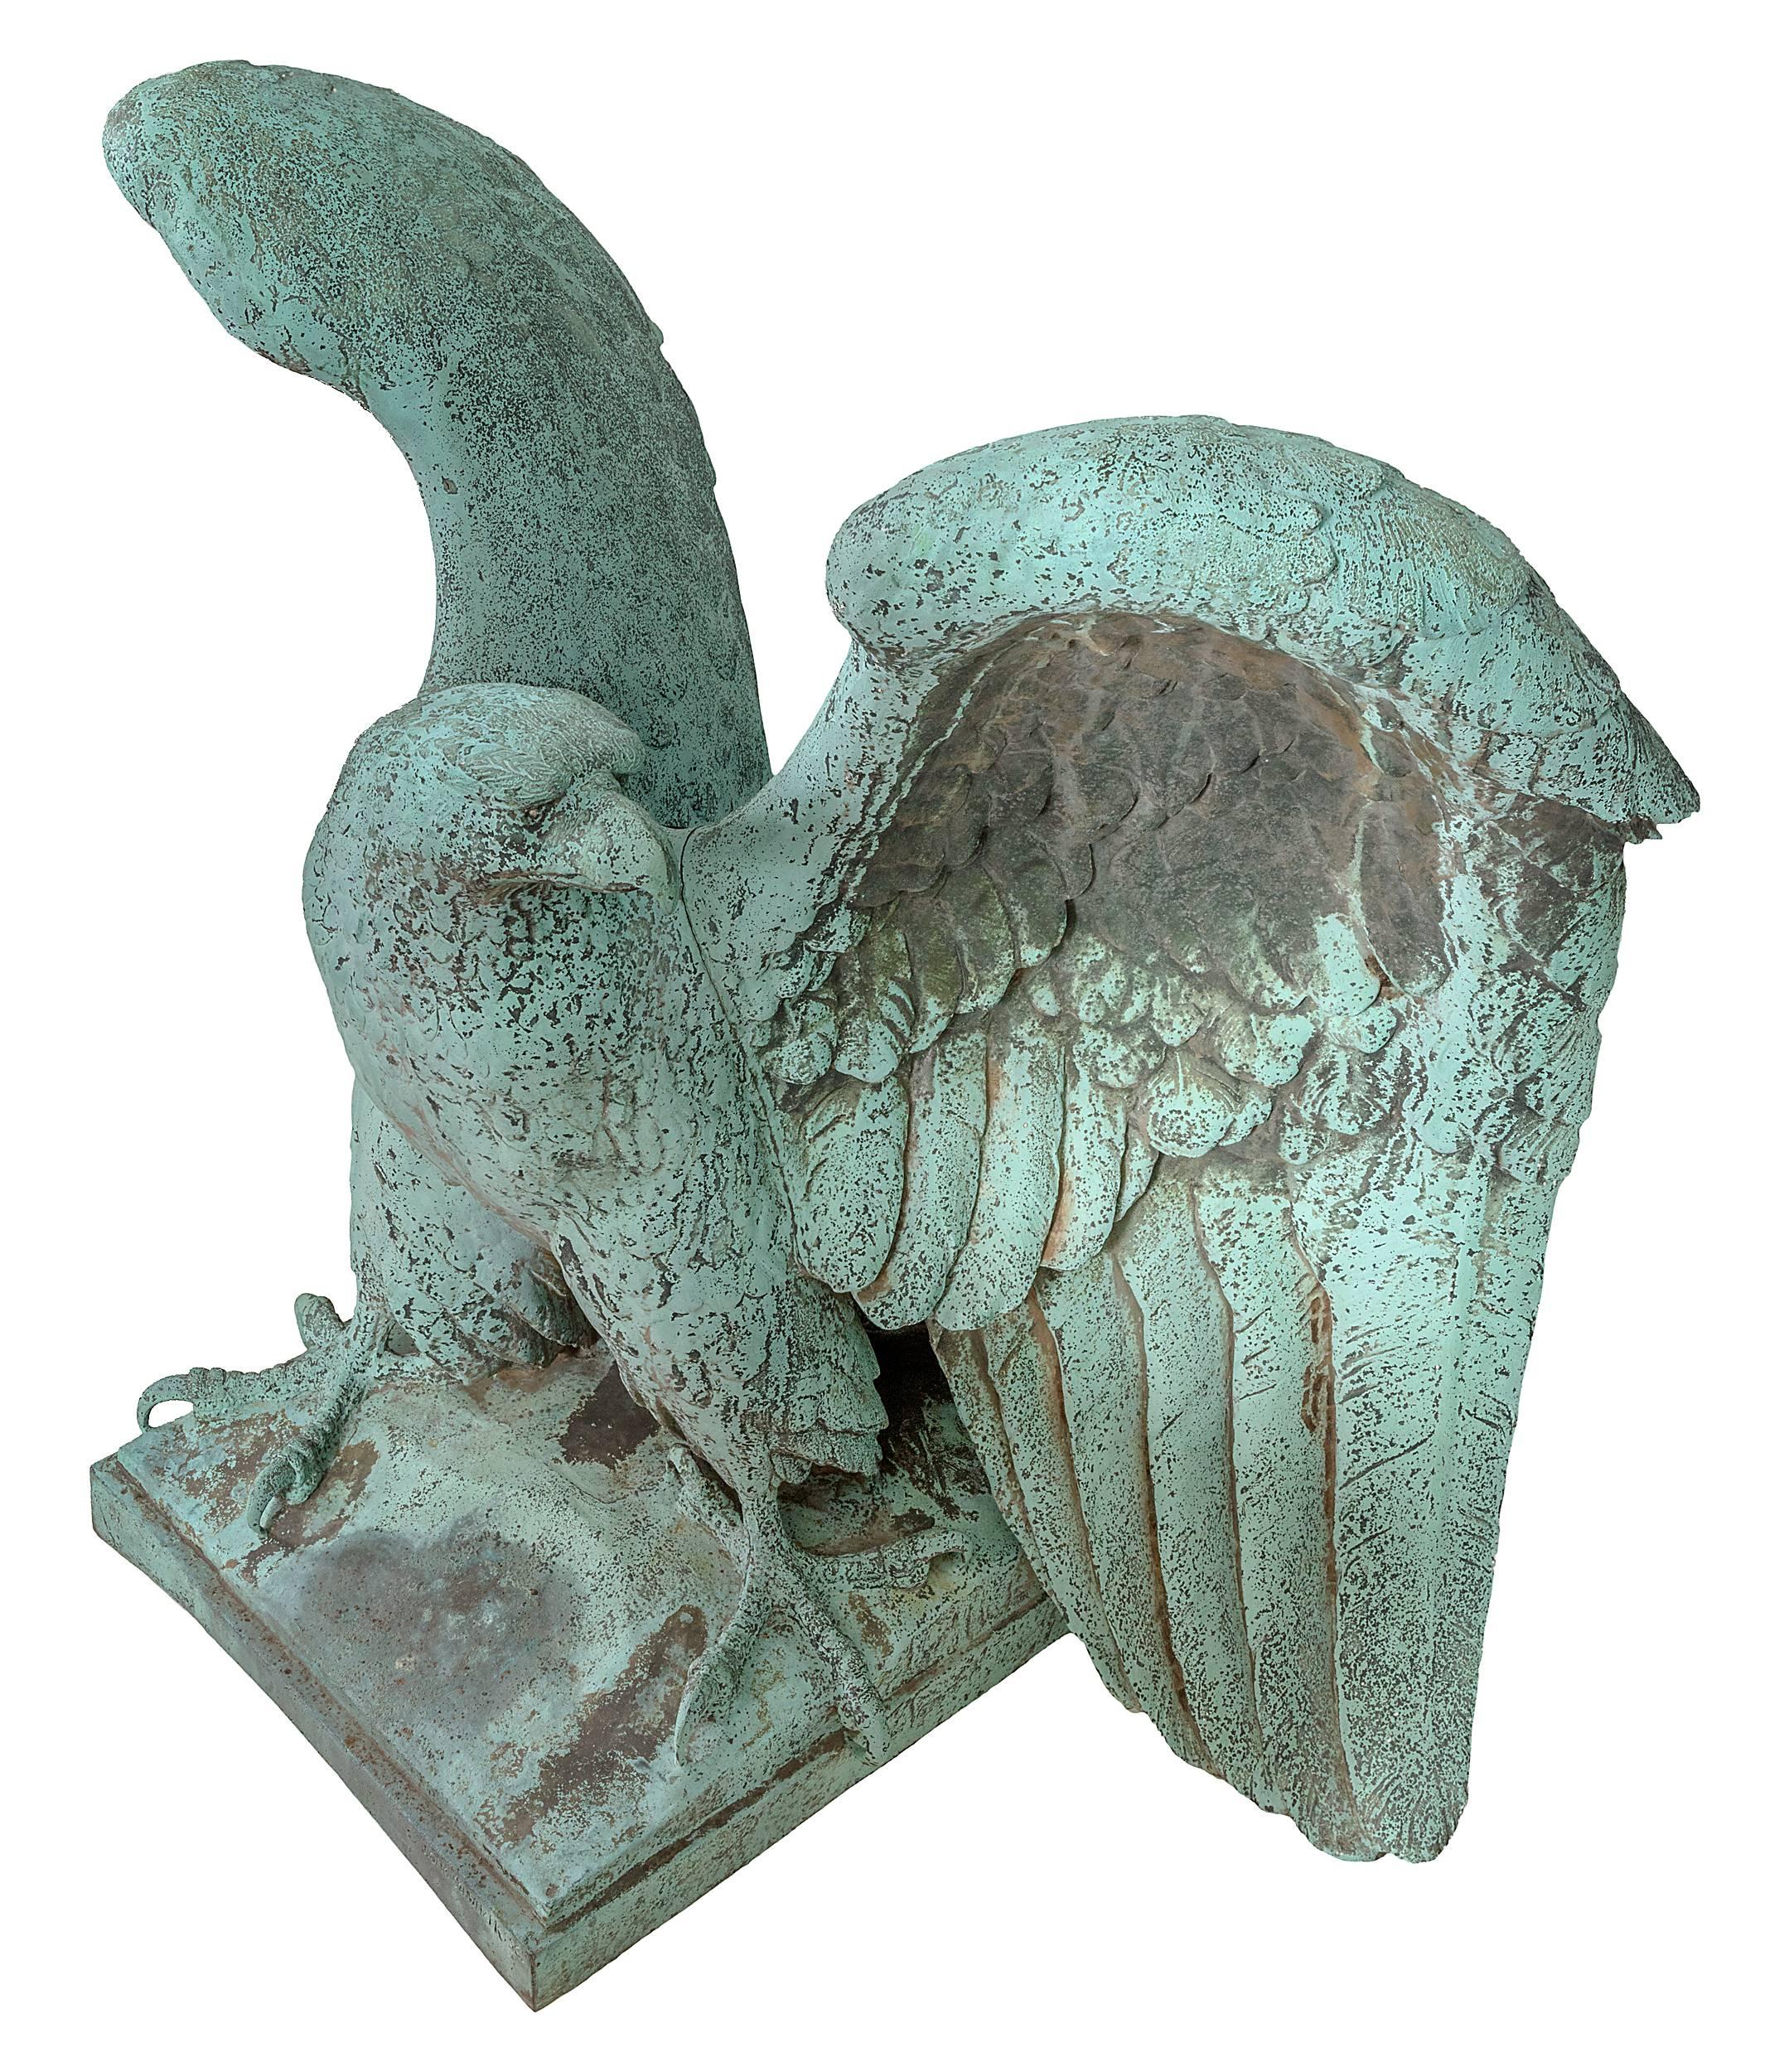 This imposing architectural eagle was made for outdoor ornamentation.